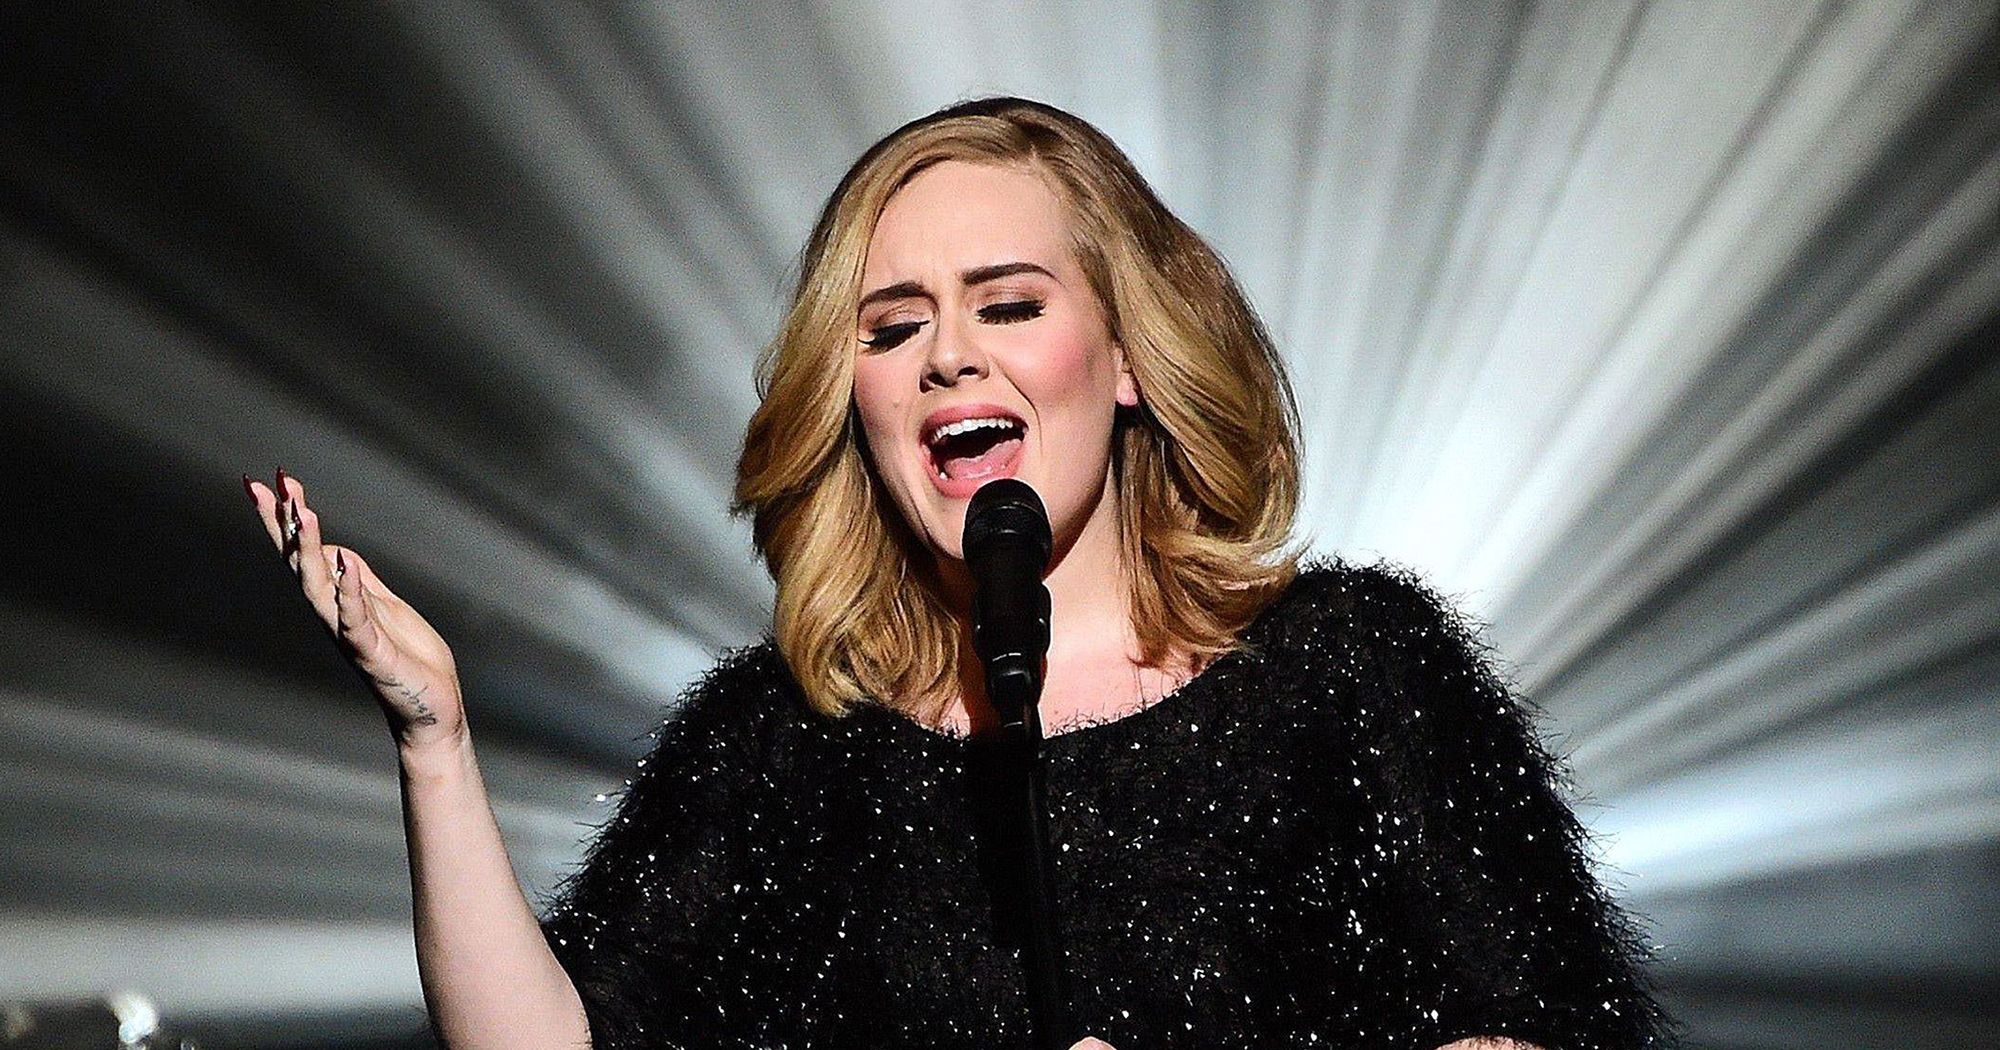 Adele says “I don’t know if I will ever tour again” after last shows on ’25’ tour